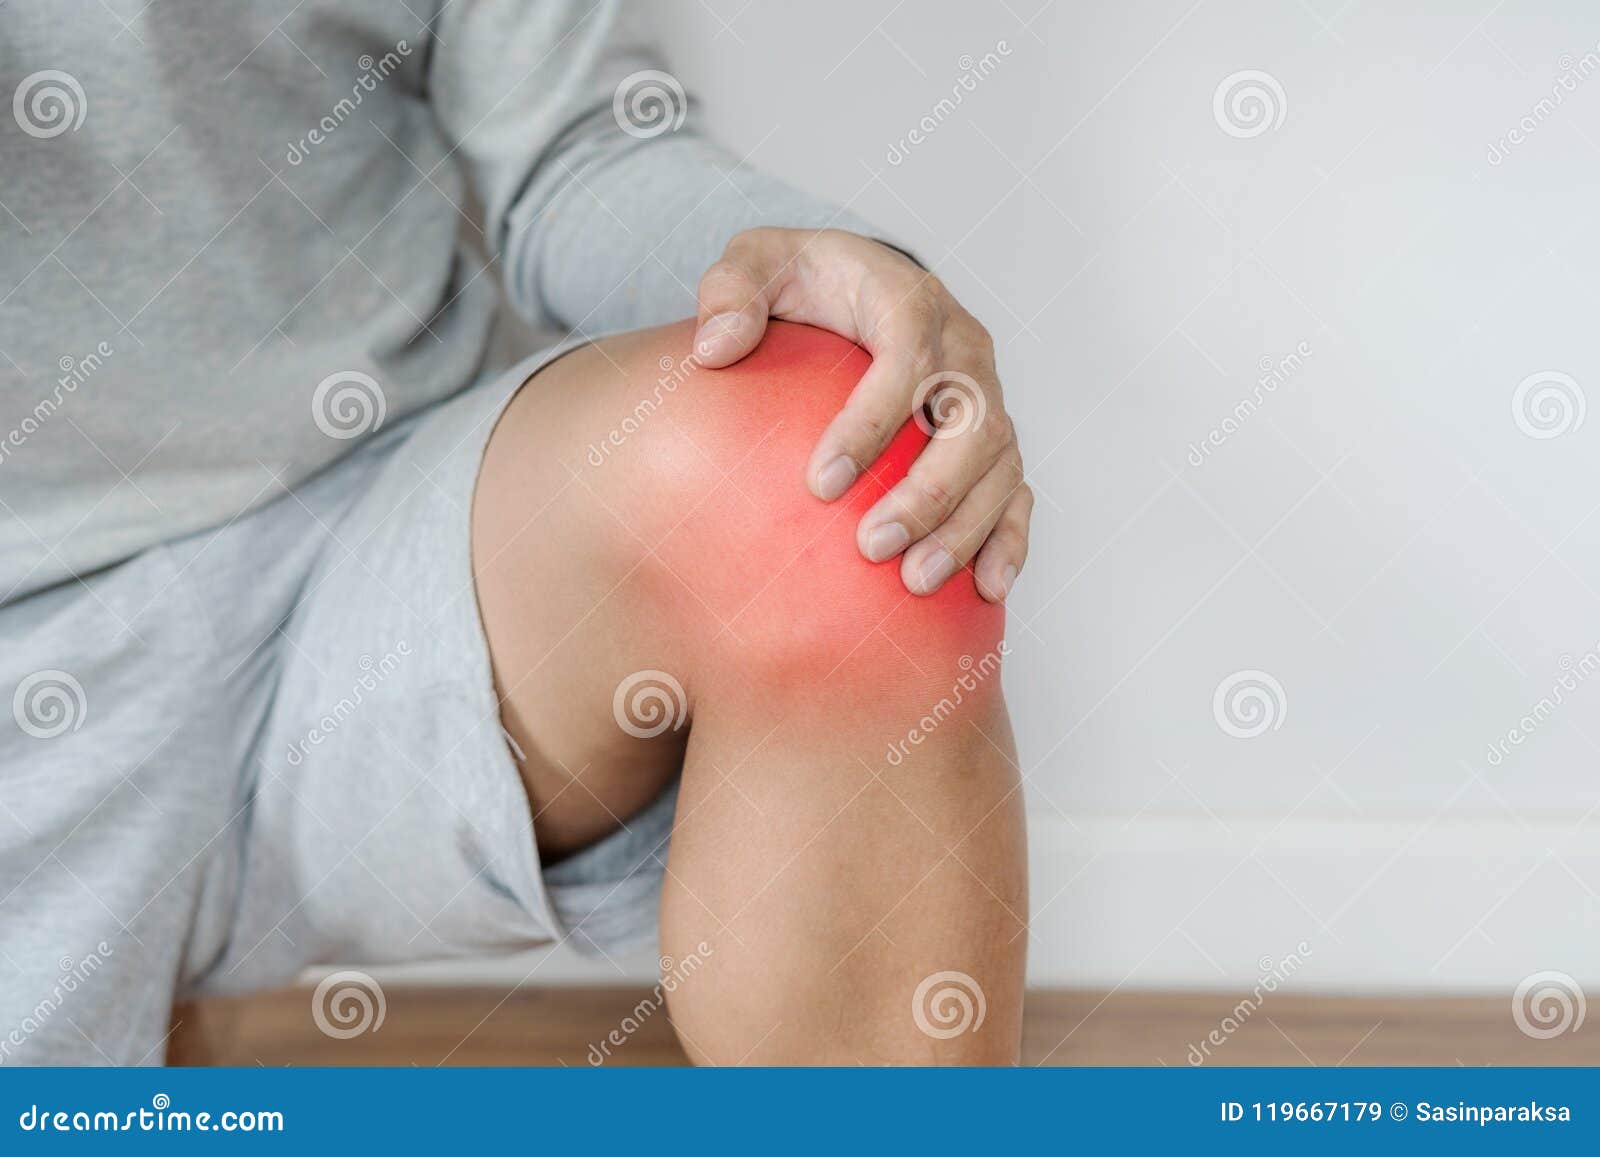 a man touching knee with red highlights concept of knee and joint pain